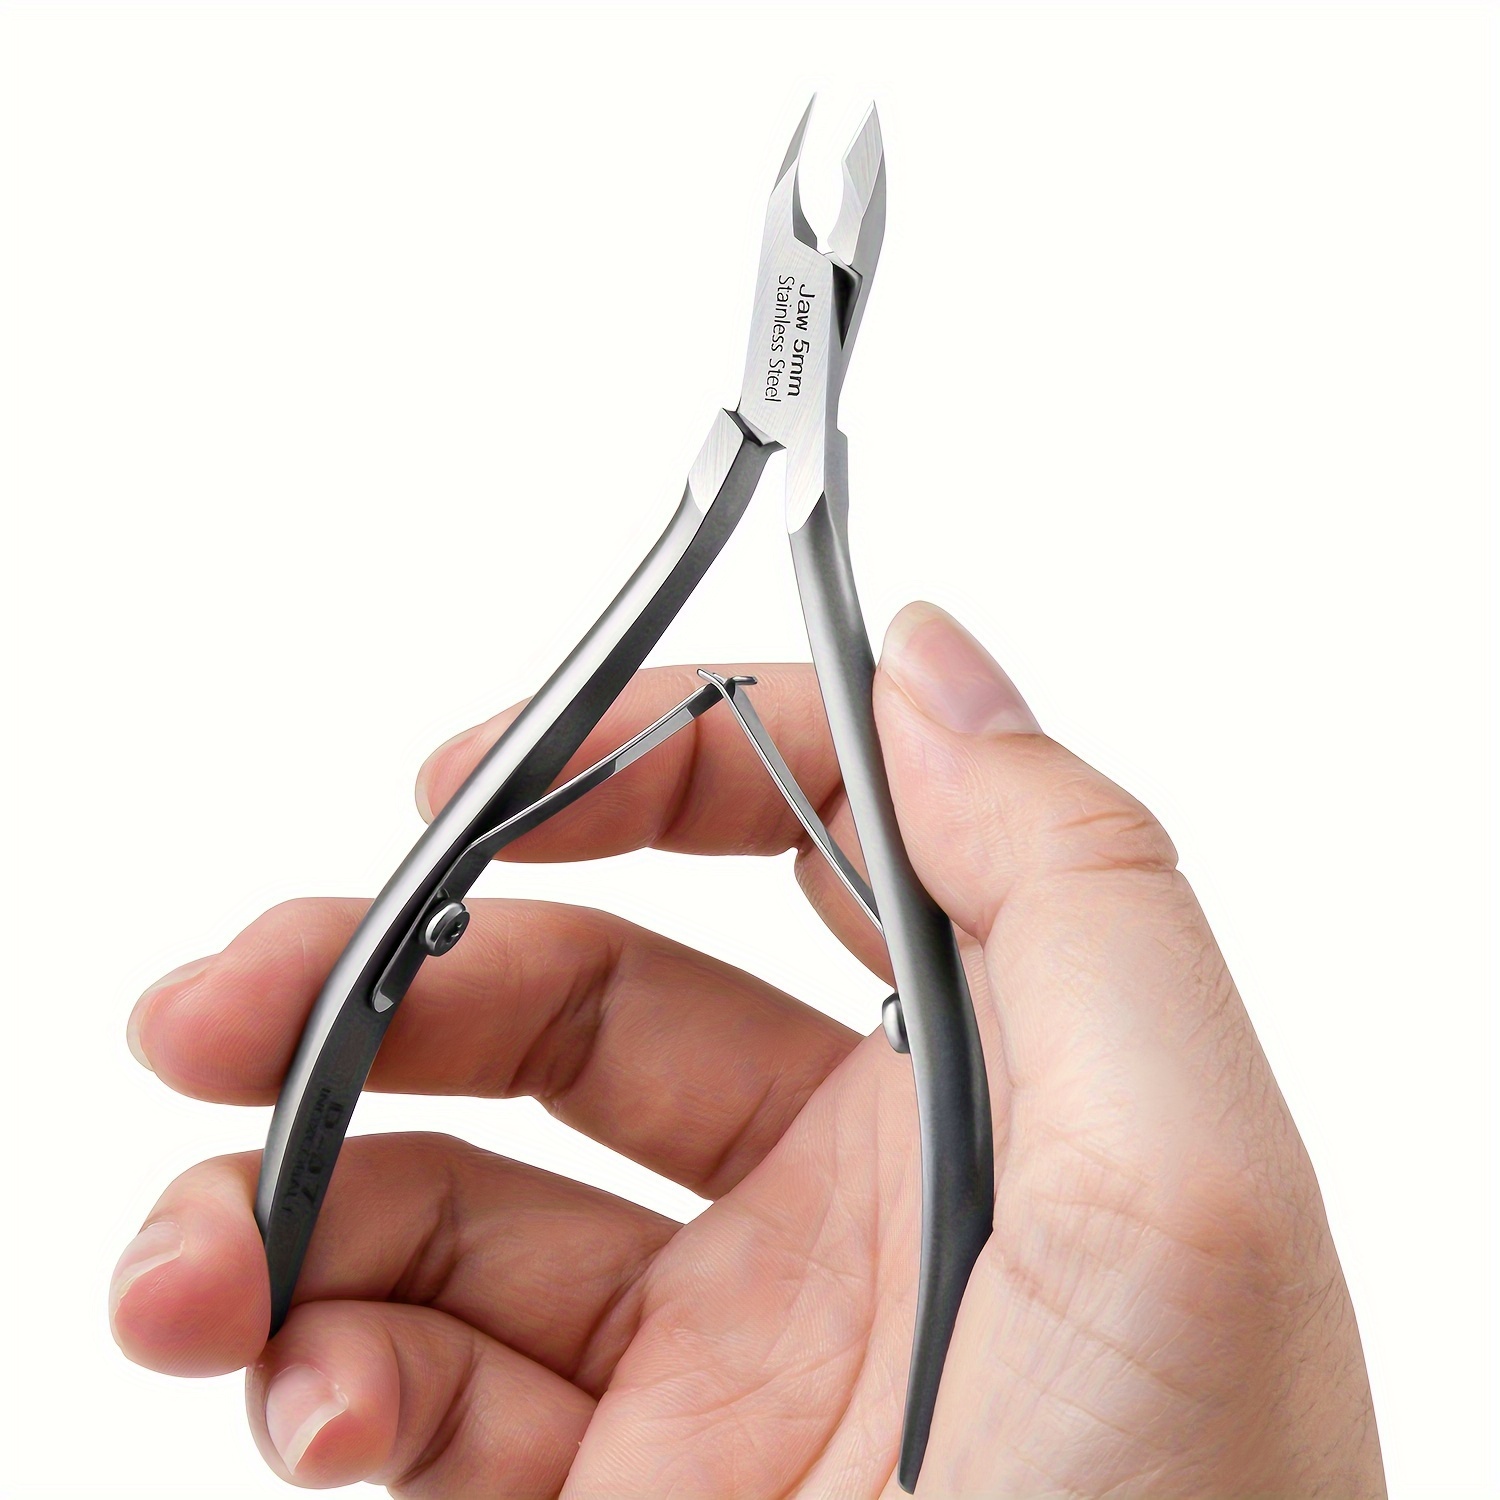 

Nail Art Cuticle Clipper - Stainless Steel Manicure & Pedicure Scissors, Dead Skin Trimmer, Oblique Cutter For Precise Nail Groove Care